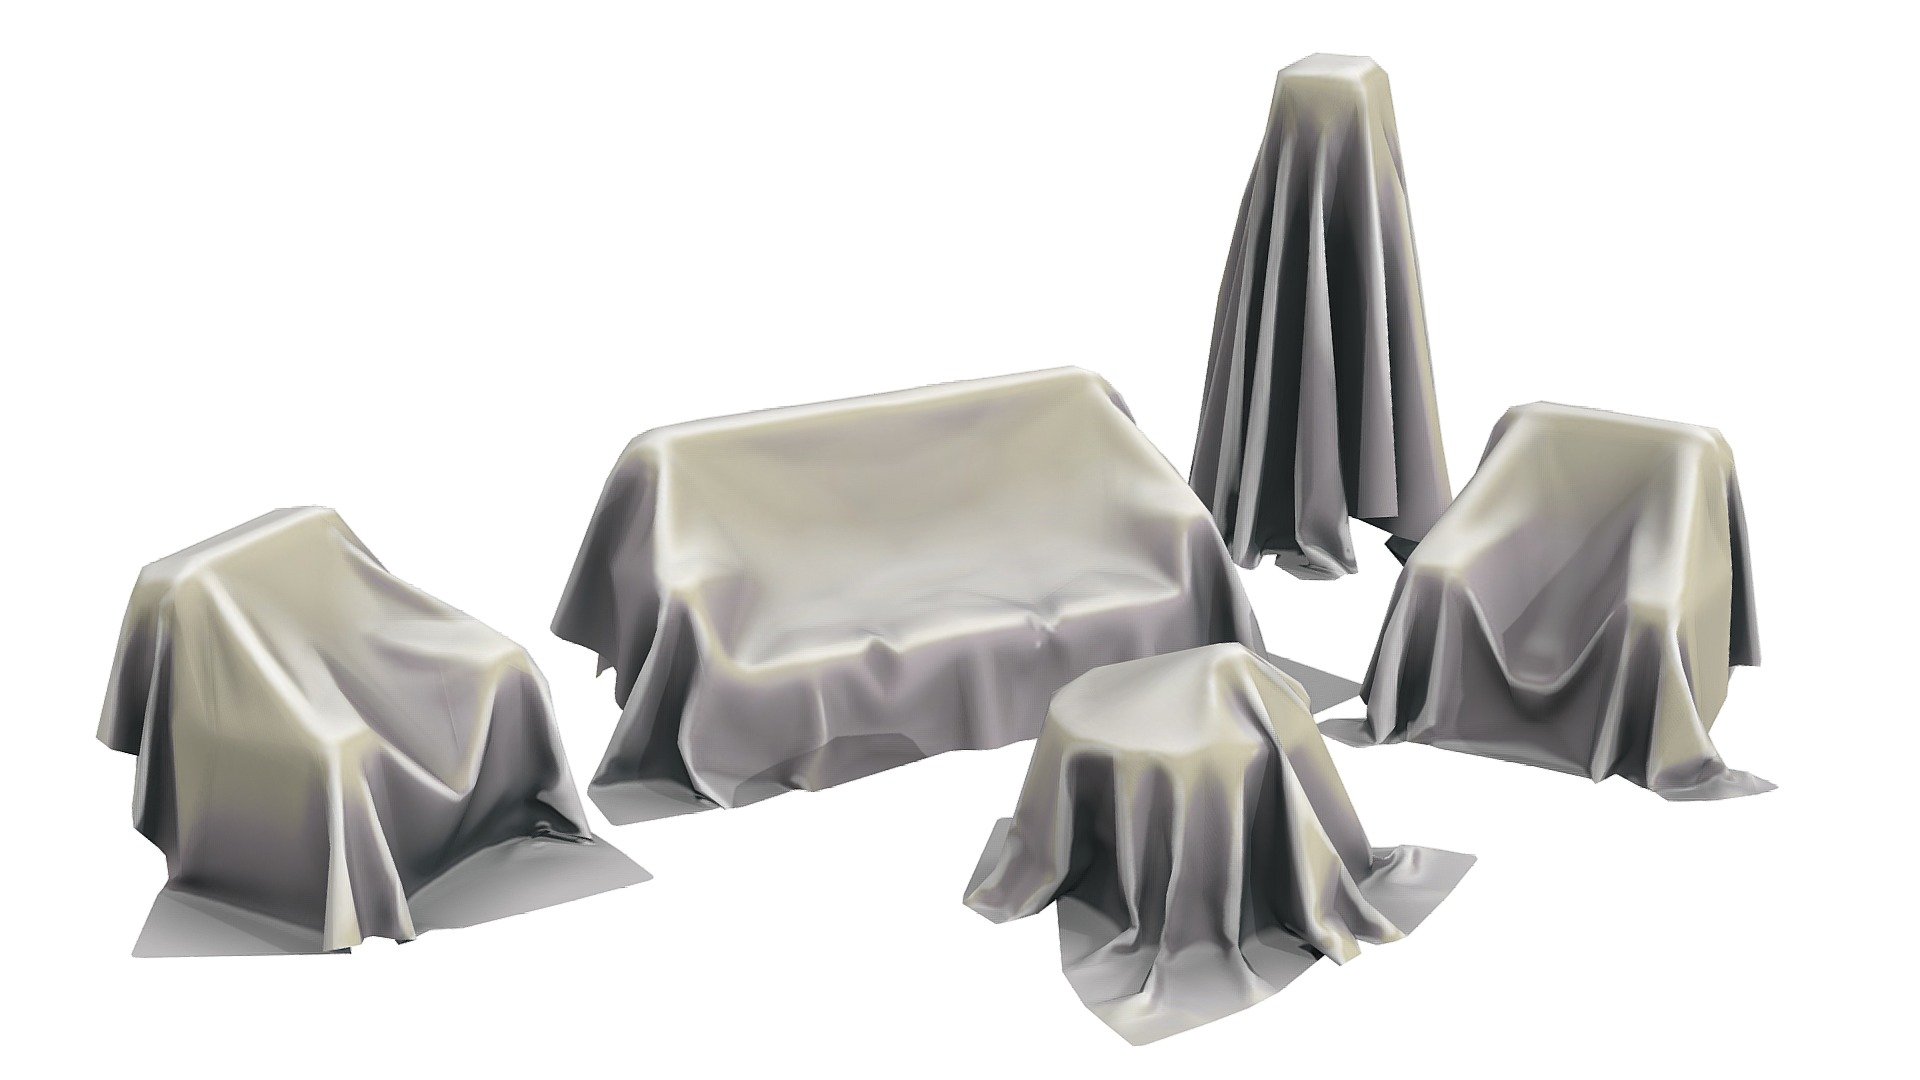 blender cloth experimentation - Furniture covered with a sheet - 3D model by StMorray 3d model